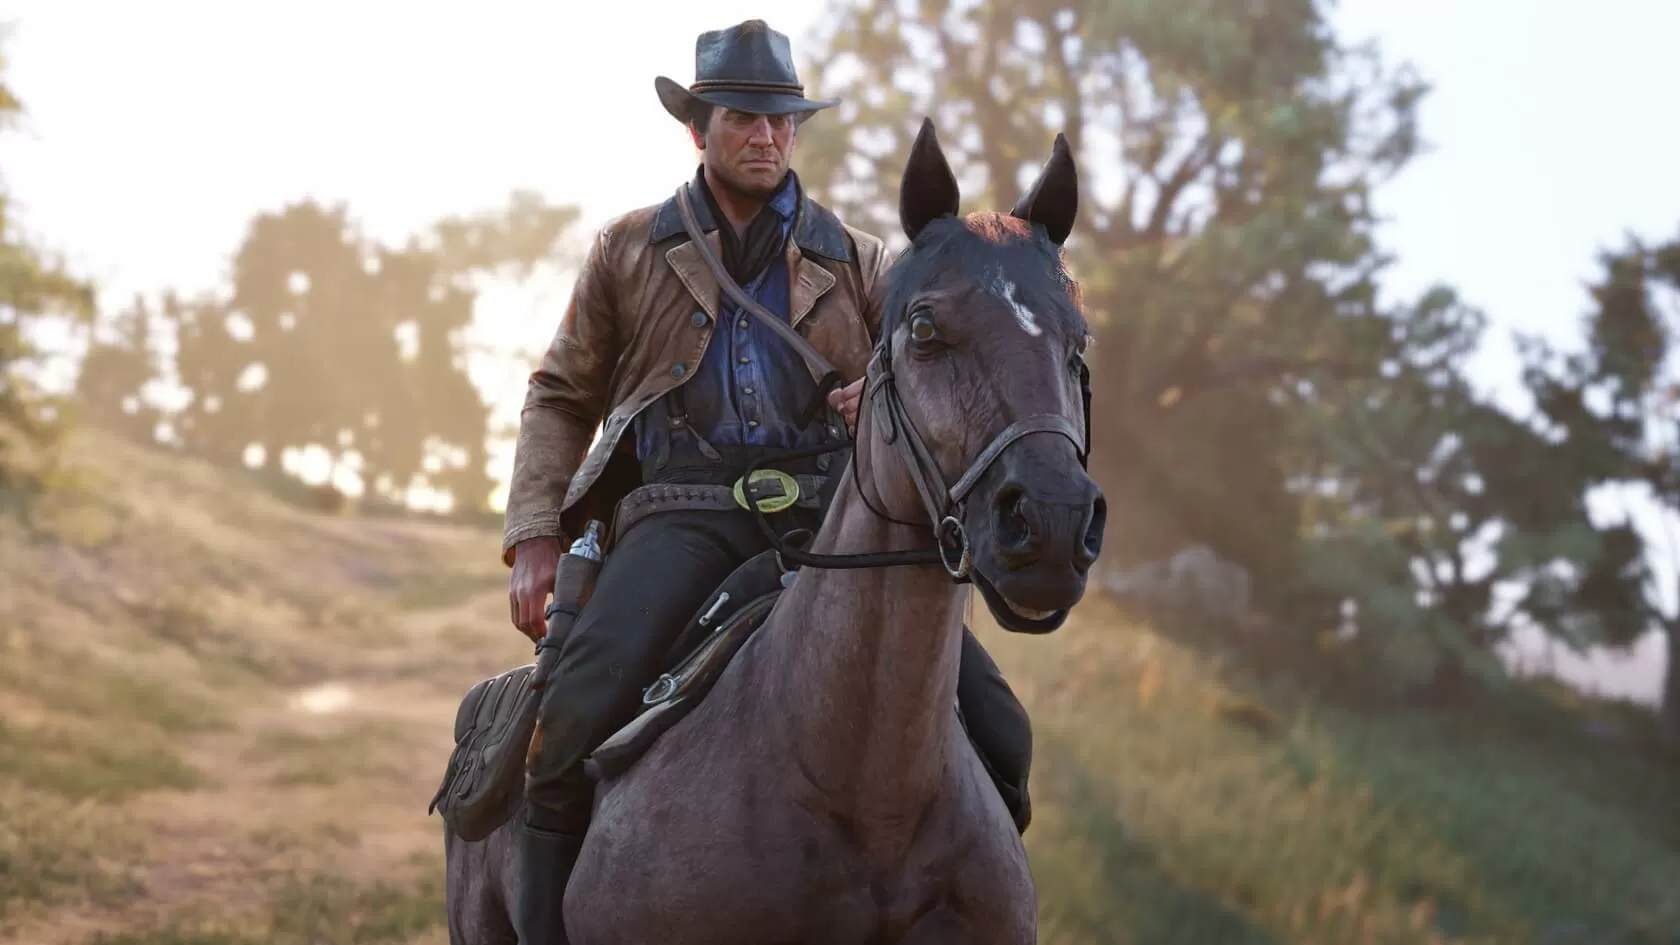 Red Dead Redemption 2's PC port ties gameplay mechanics to framerate, users claim